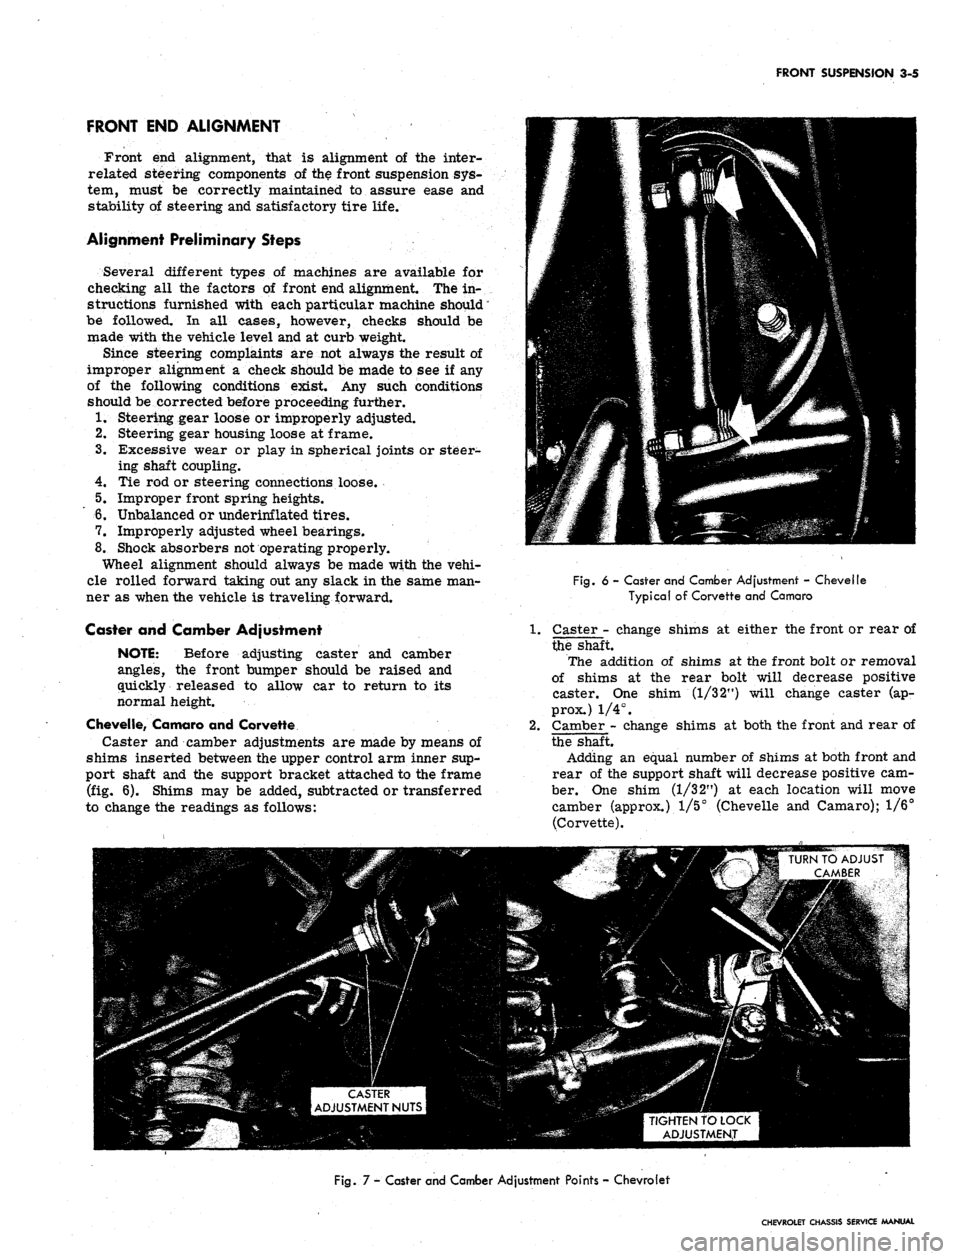 CHEVROLET CAMARO 1967 1.G Chassis Workshop Manual 
FRONT SUSPENSION 3-5

FRONT END ALIGNMENT

Front end alignment, that is alignment of the inter-

related steering components of the front suspension sys-

tem, must be correctly maintained to assure 